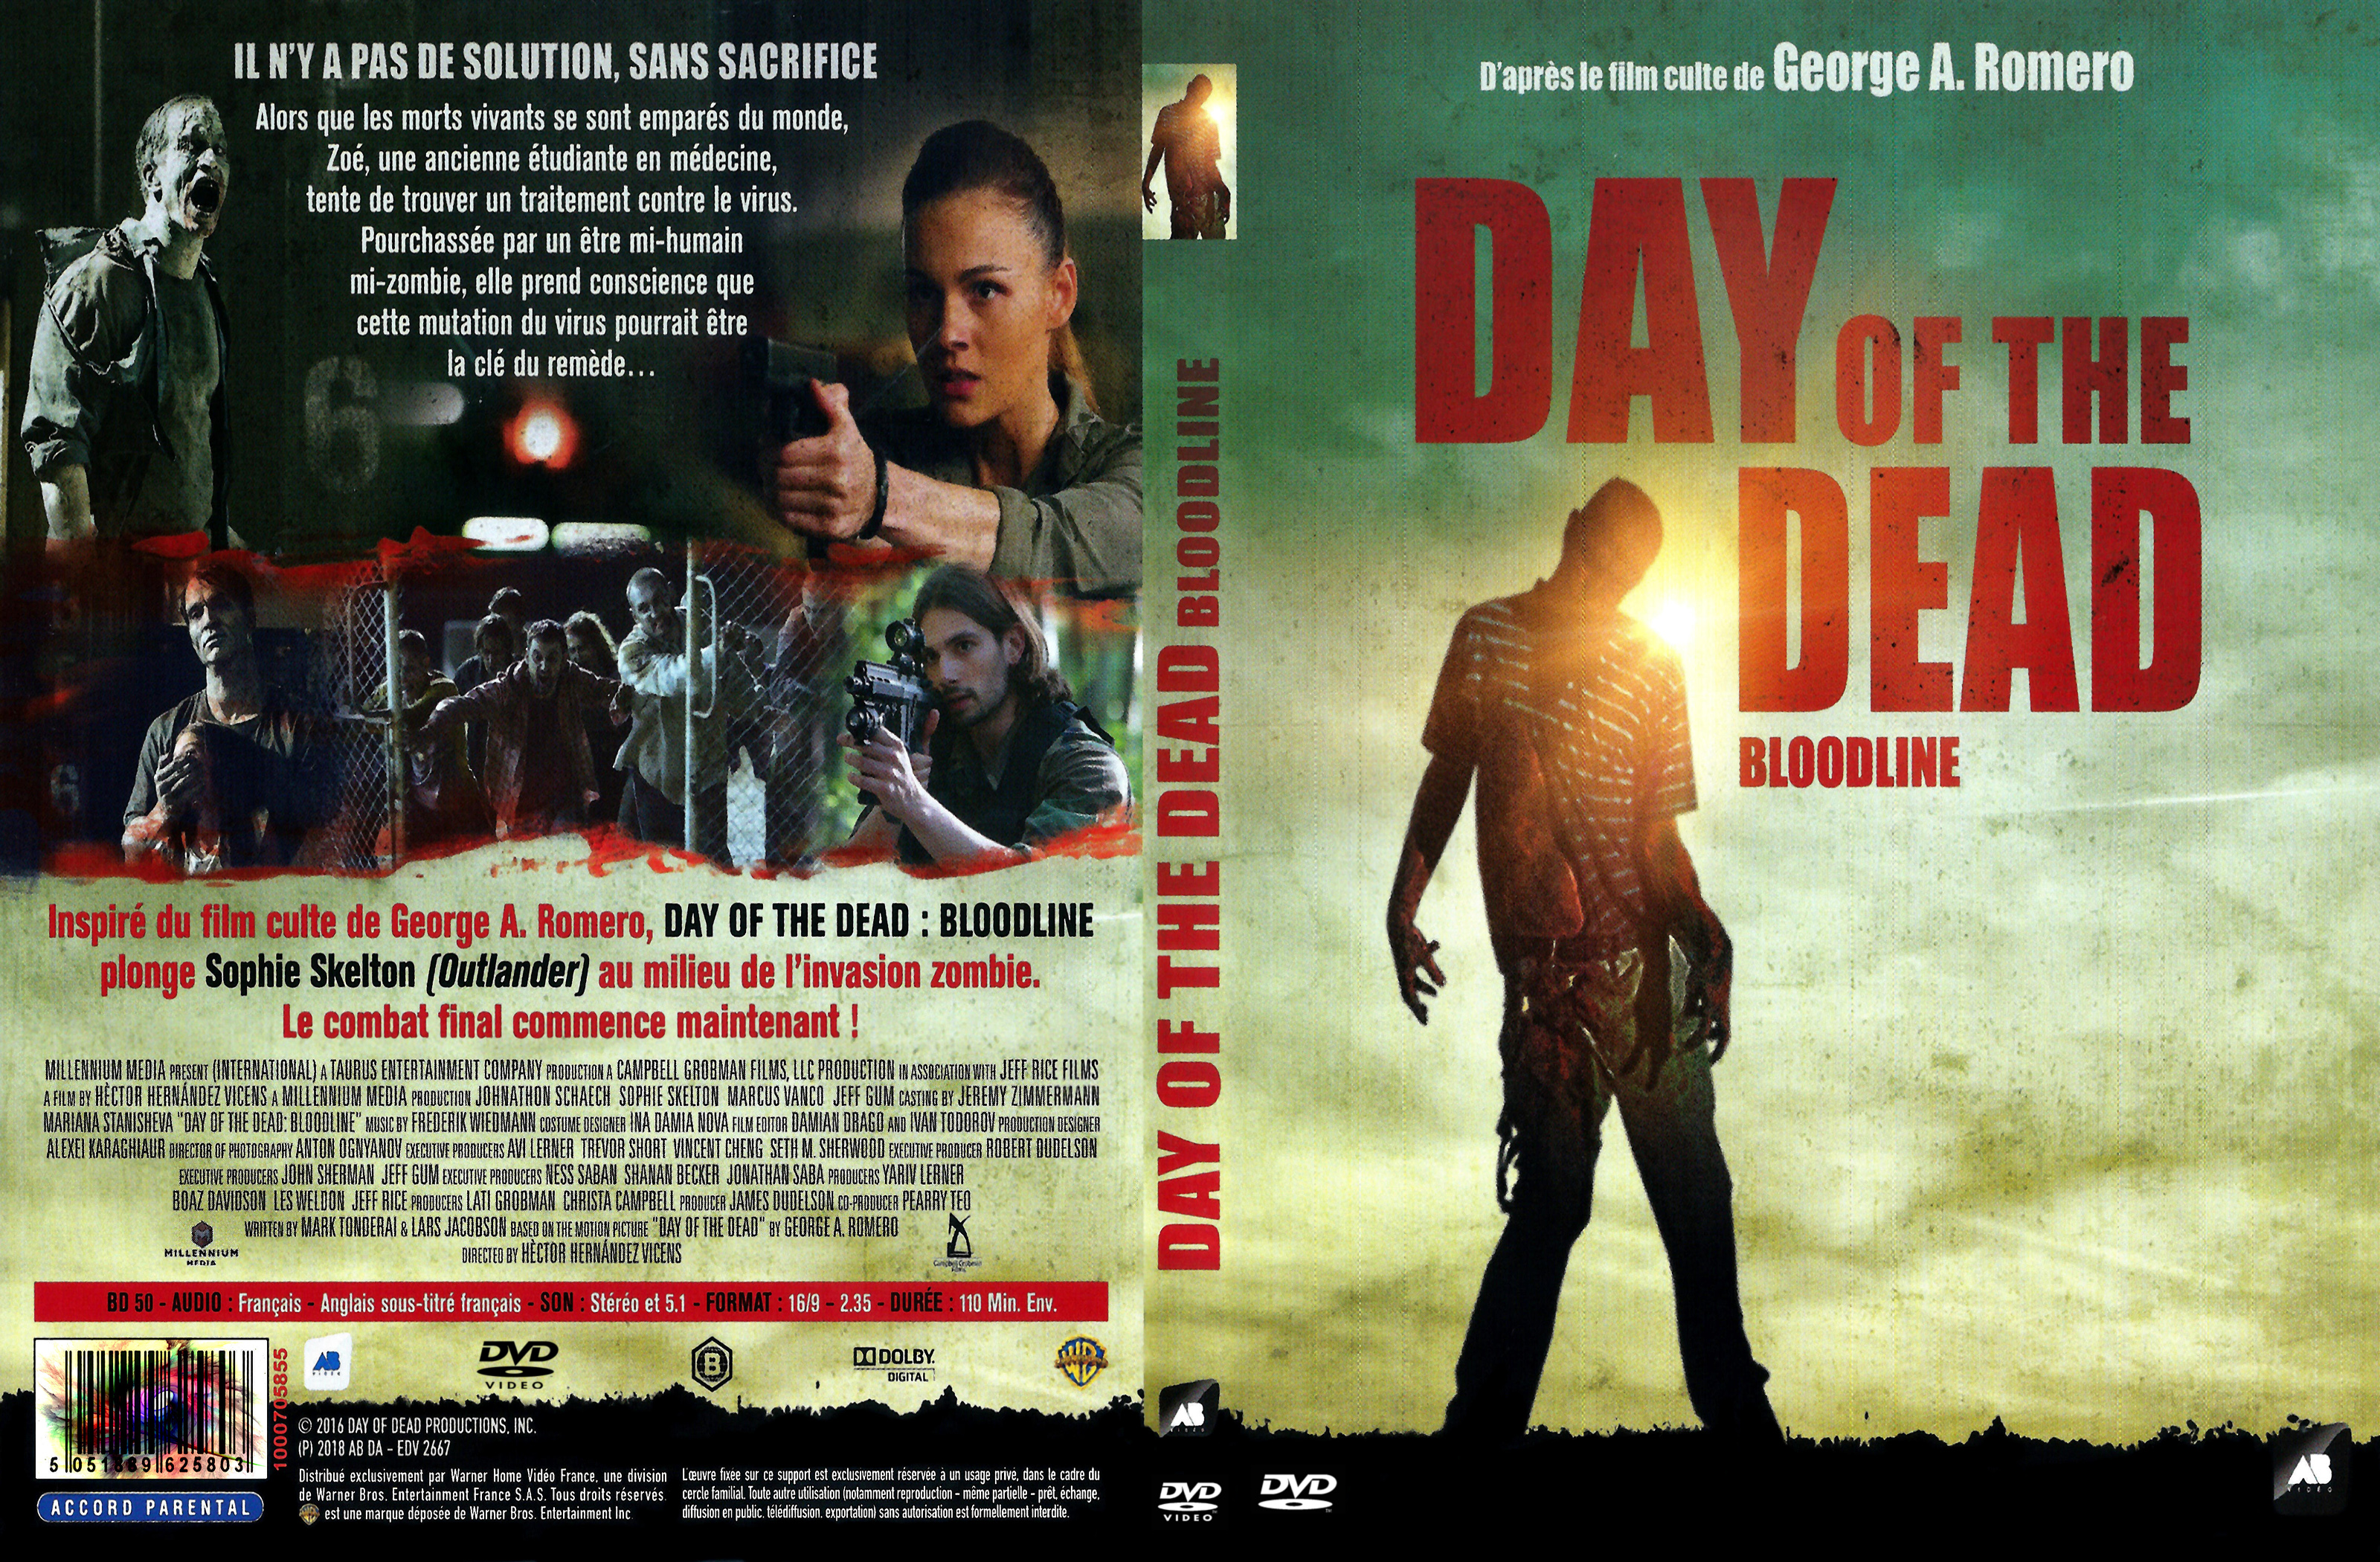 Jaquette DVD Day of the Dead Bloodline custom